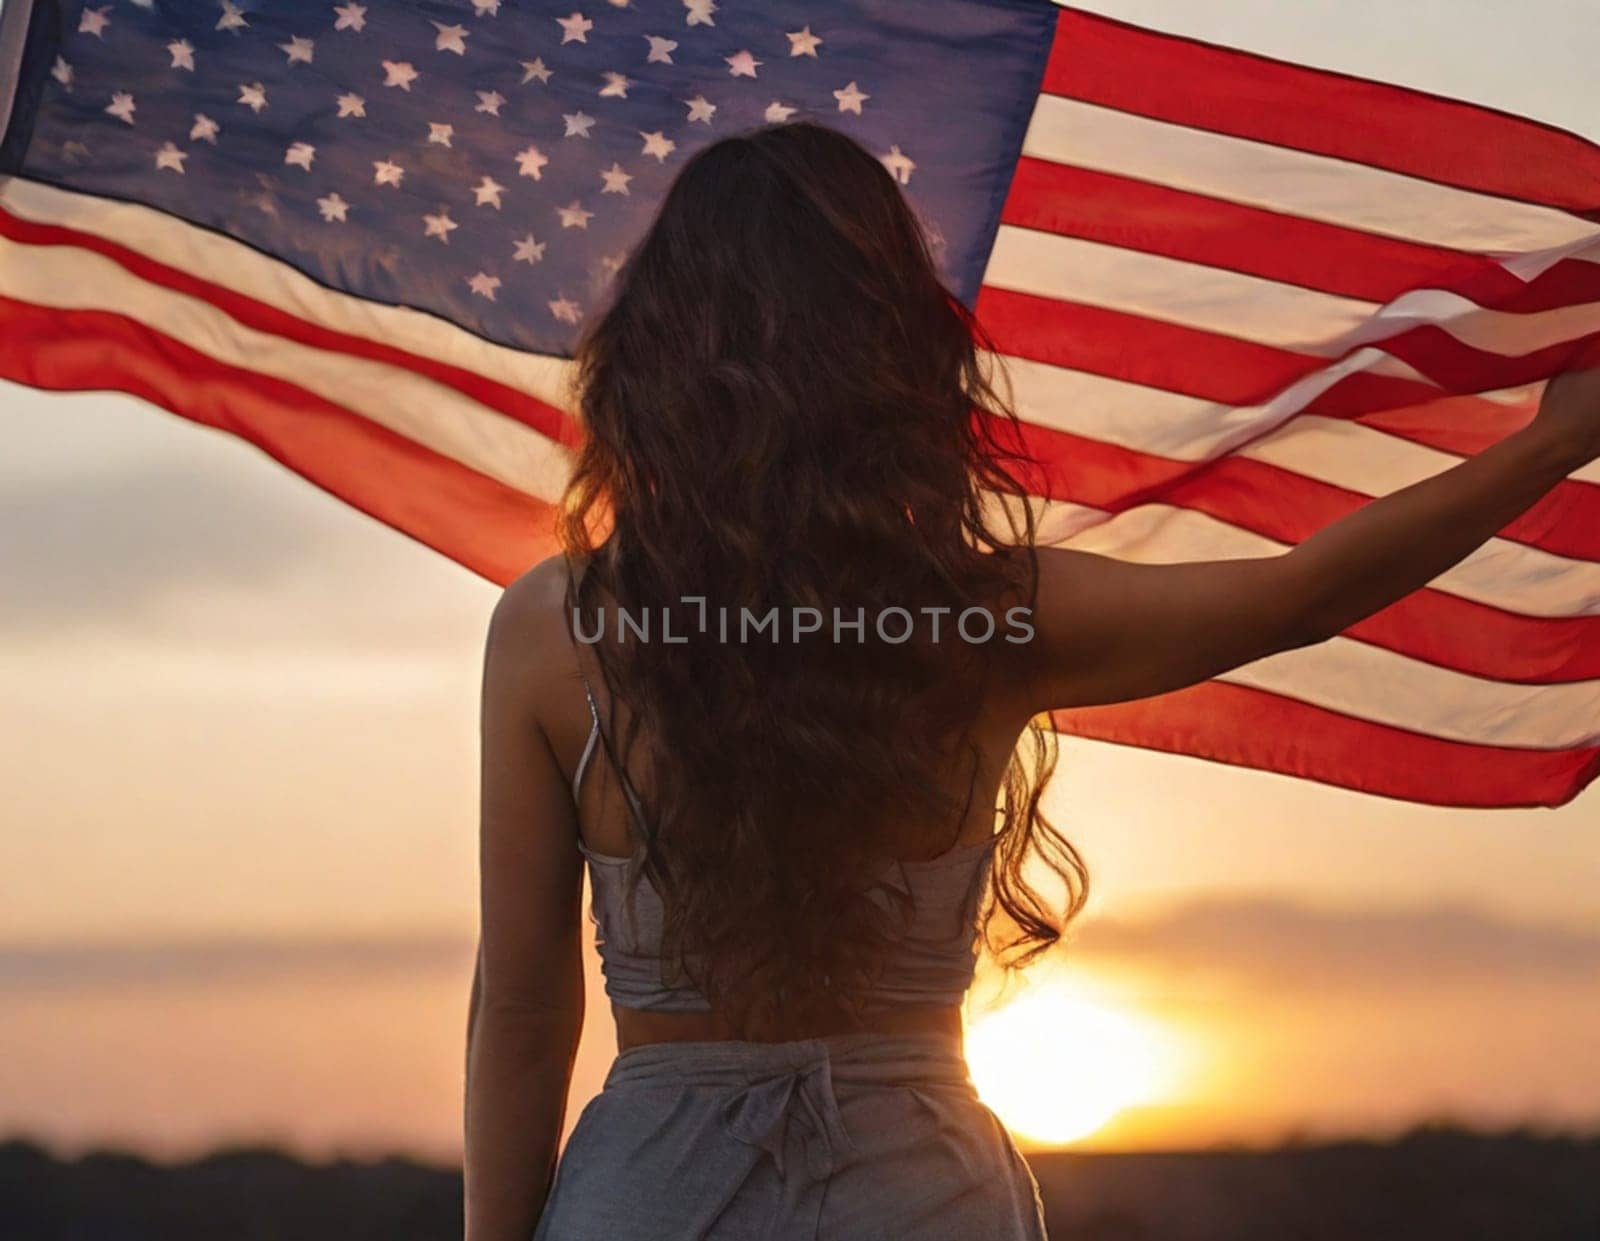 Rear view of young woman with long hair holding USA flag enjoying sunset in nature.